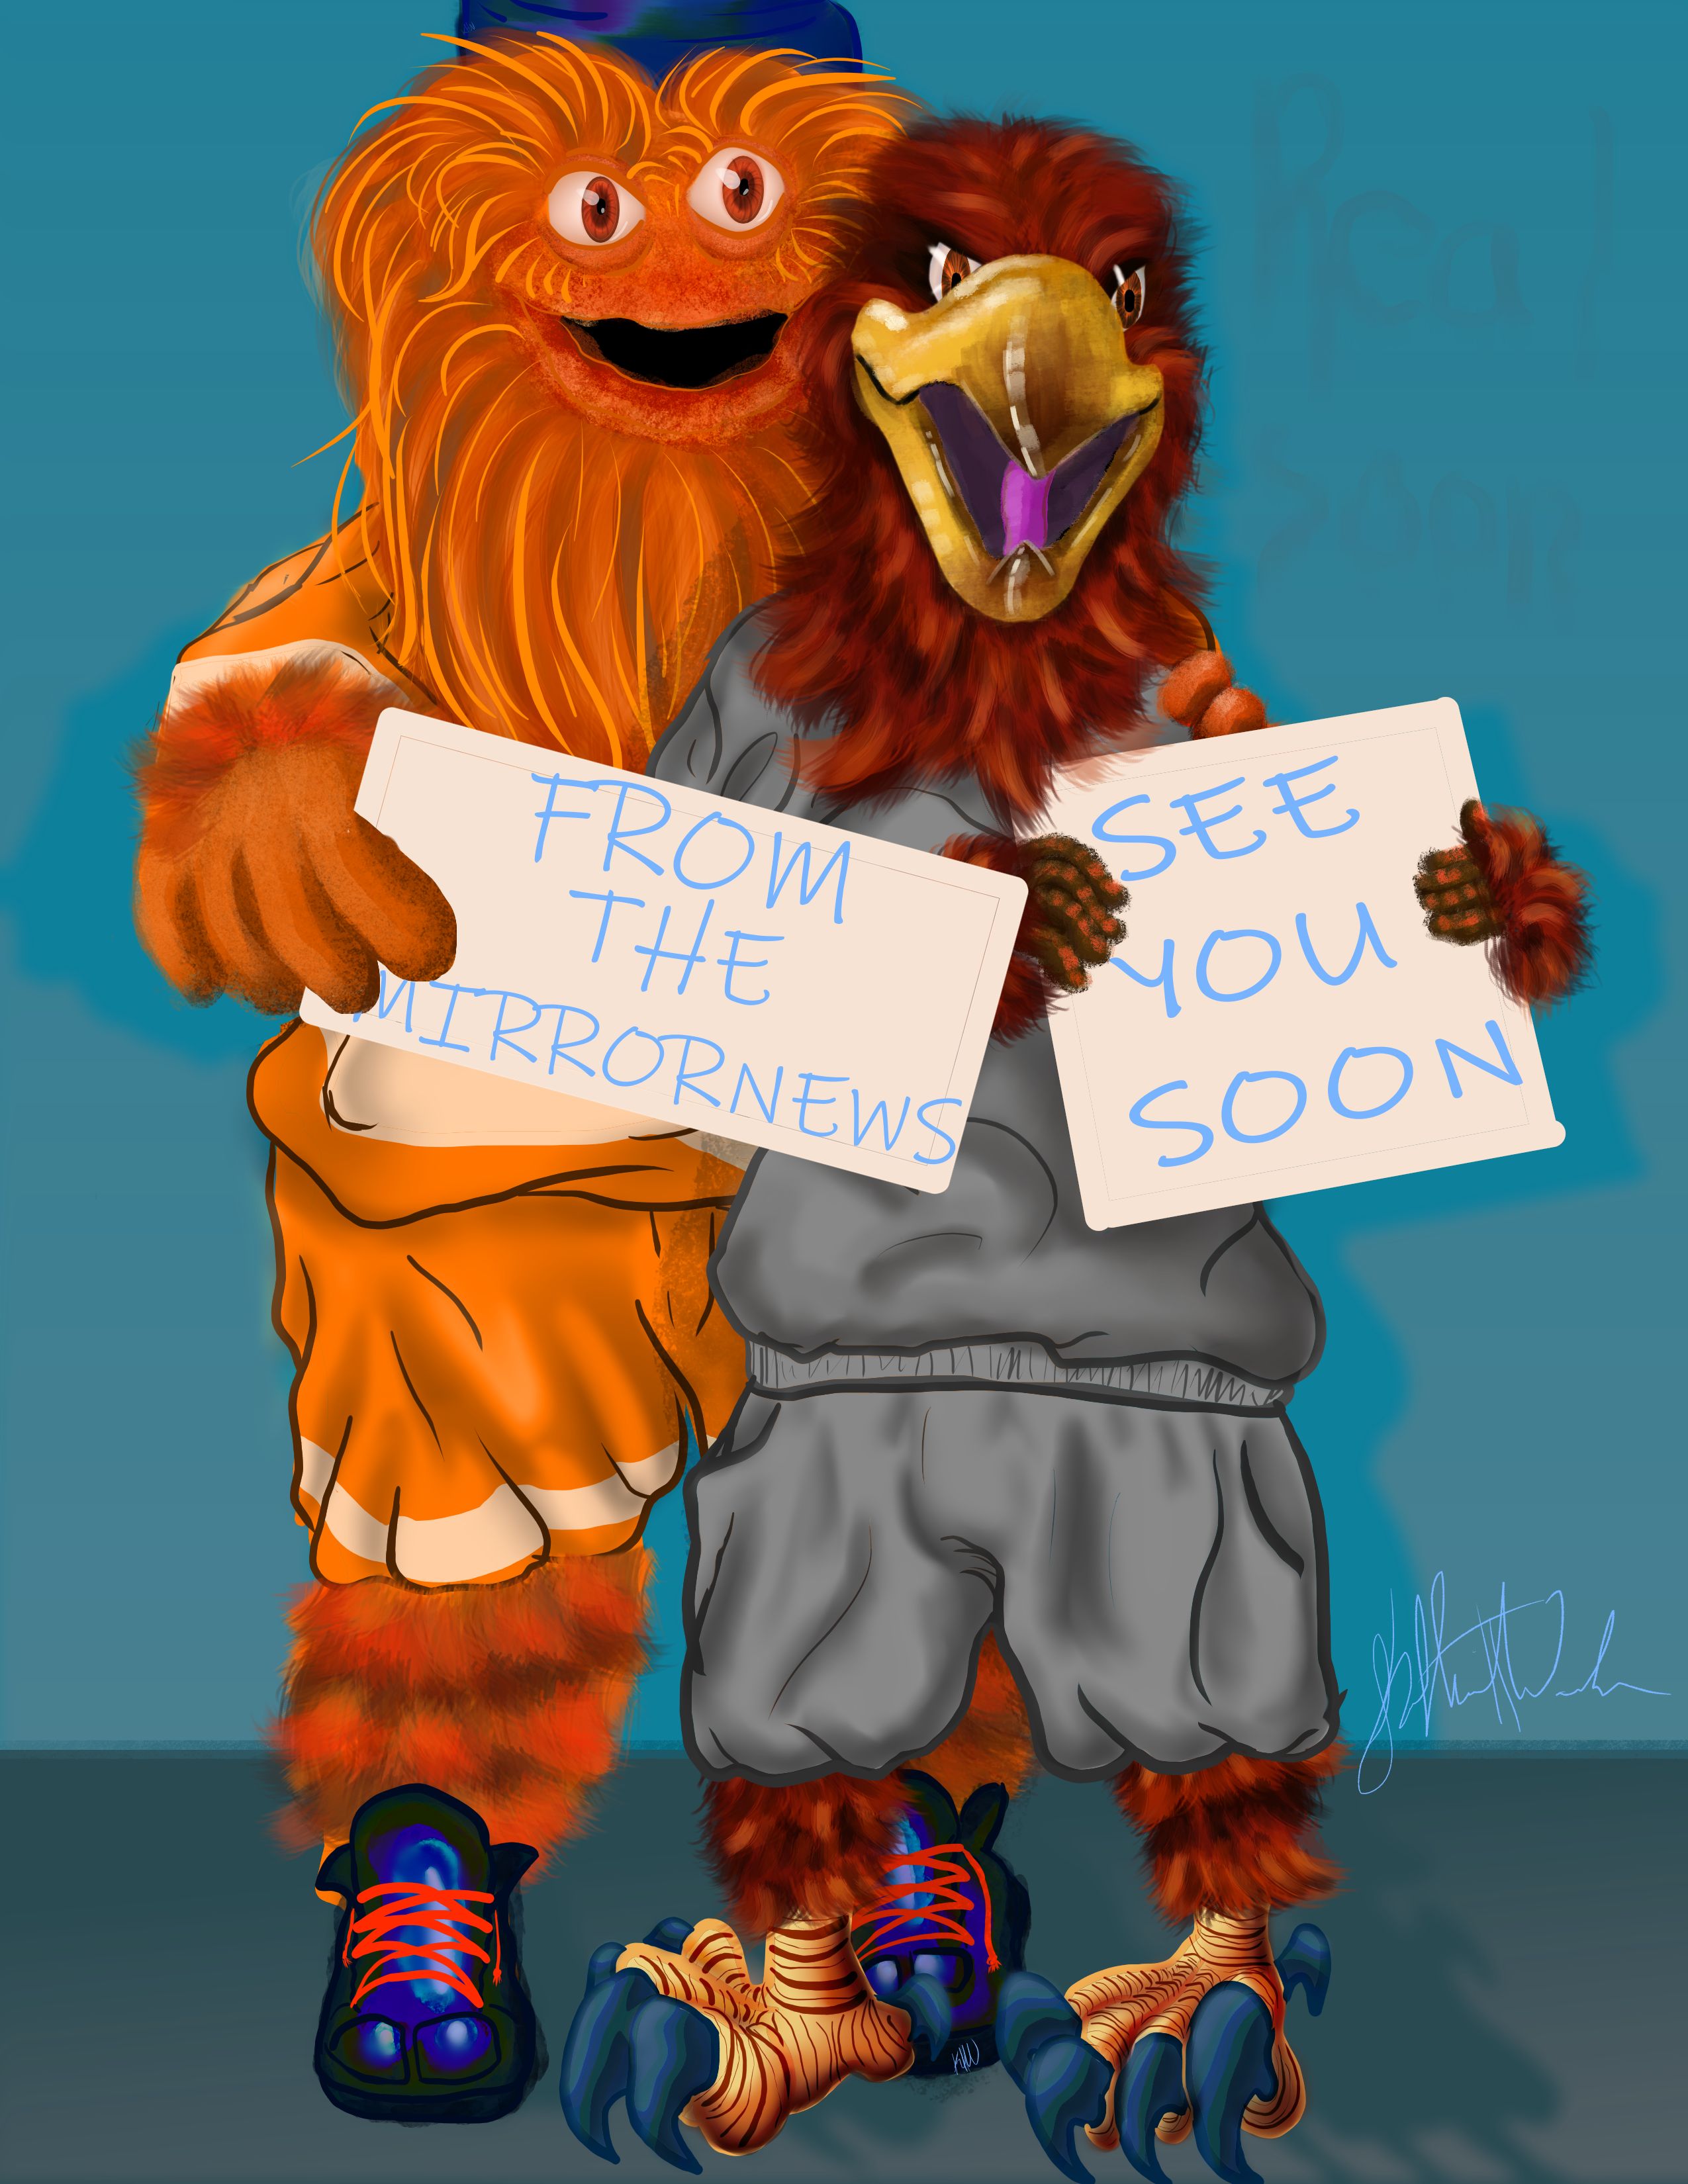 Hawkster and Gritty mascots thank readers